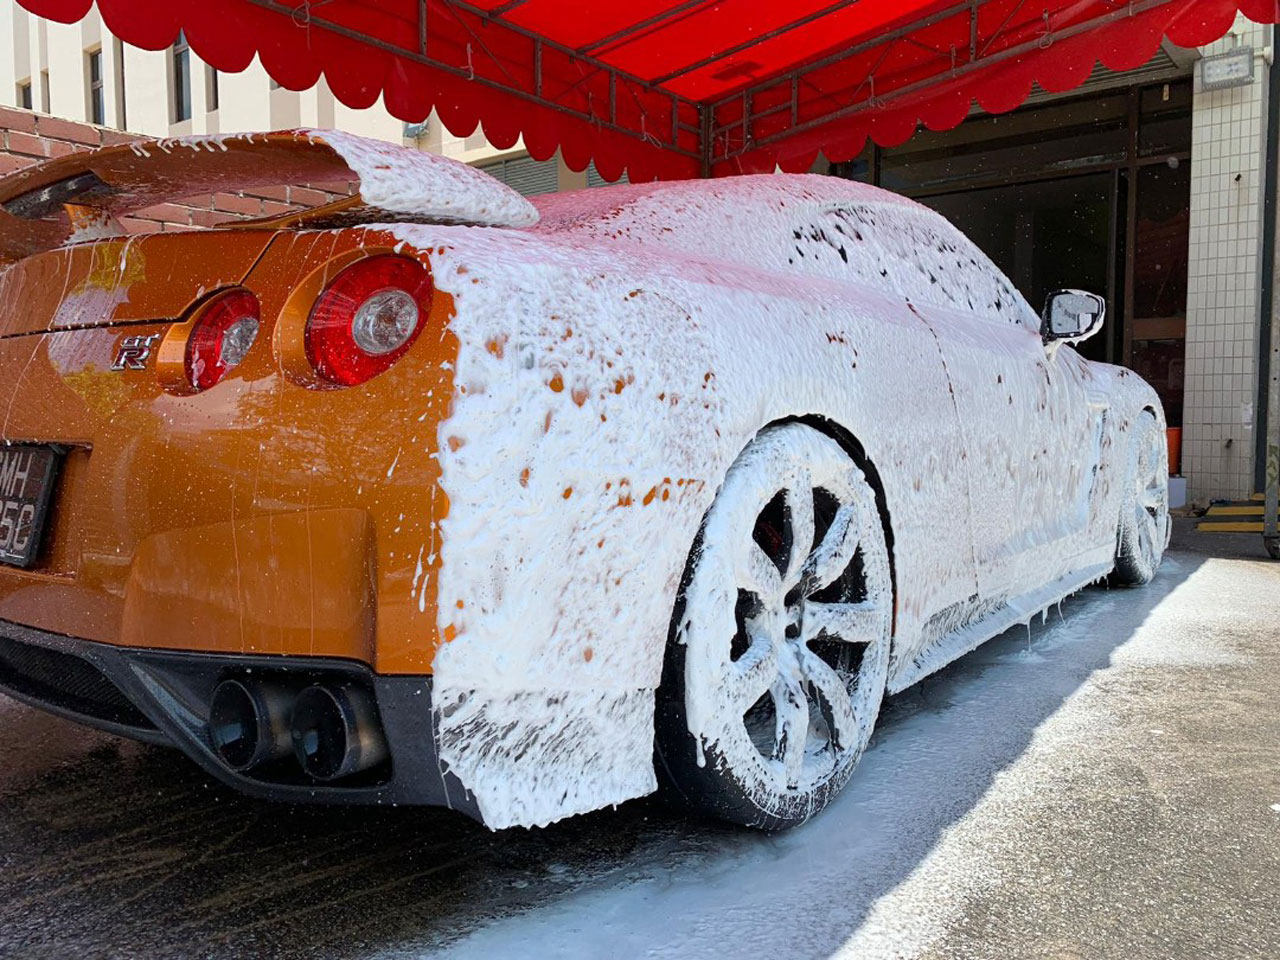 An orange sports car with a ceramic coating being washed in shade